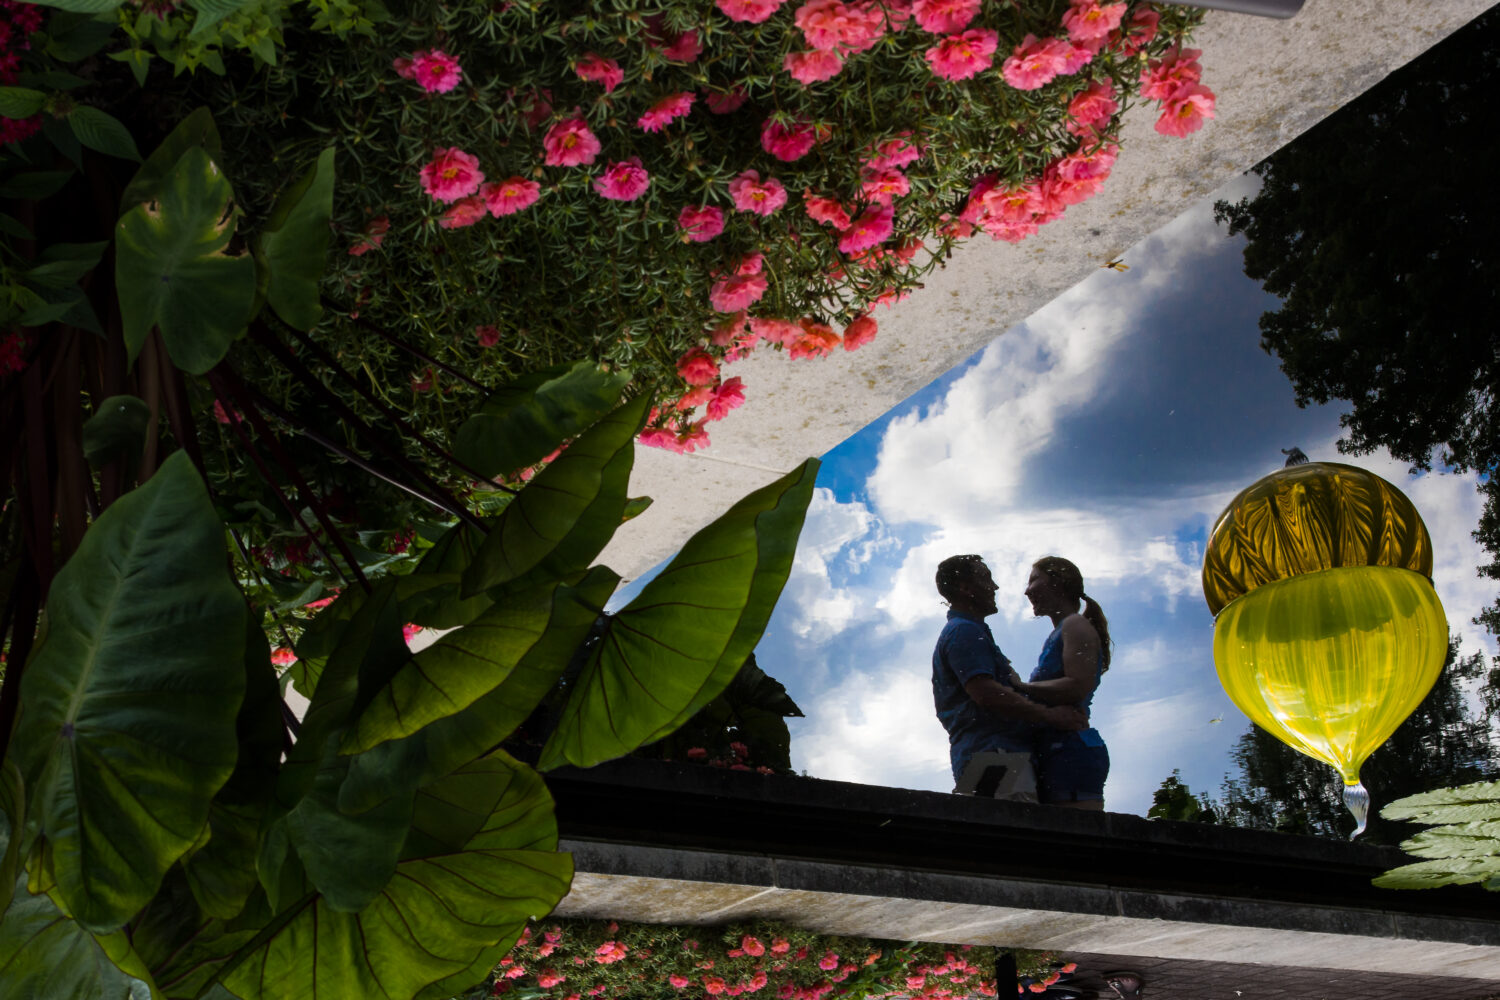 Creative Proposal Photographer, rhinehart photographer, captures this creative, fun, unique image through a reflection in the water of the couple hugging and facing each other surrounded by vibrant colored flowers and plants